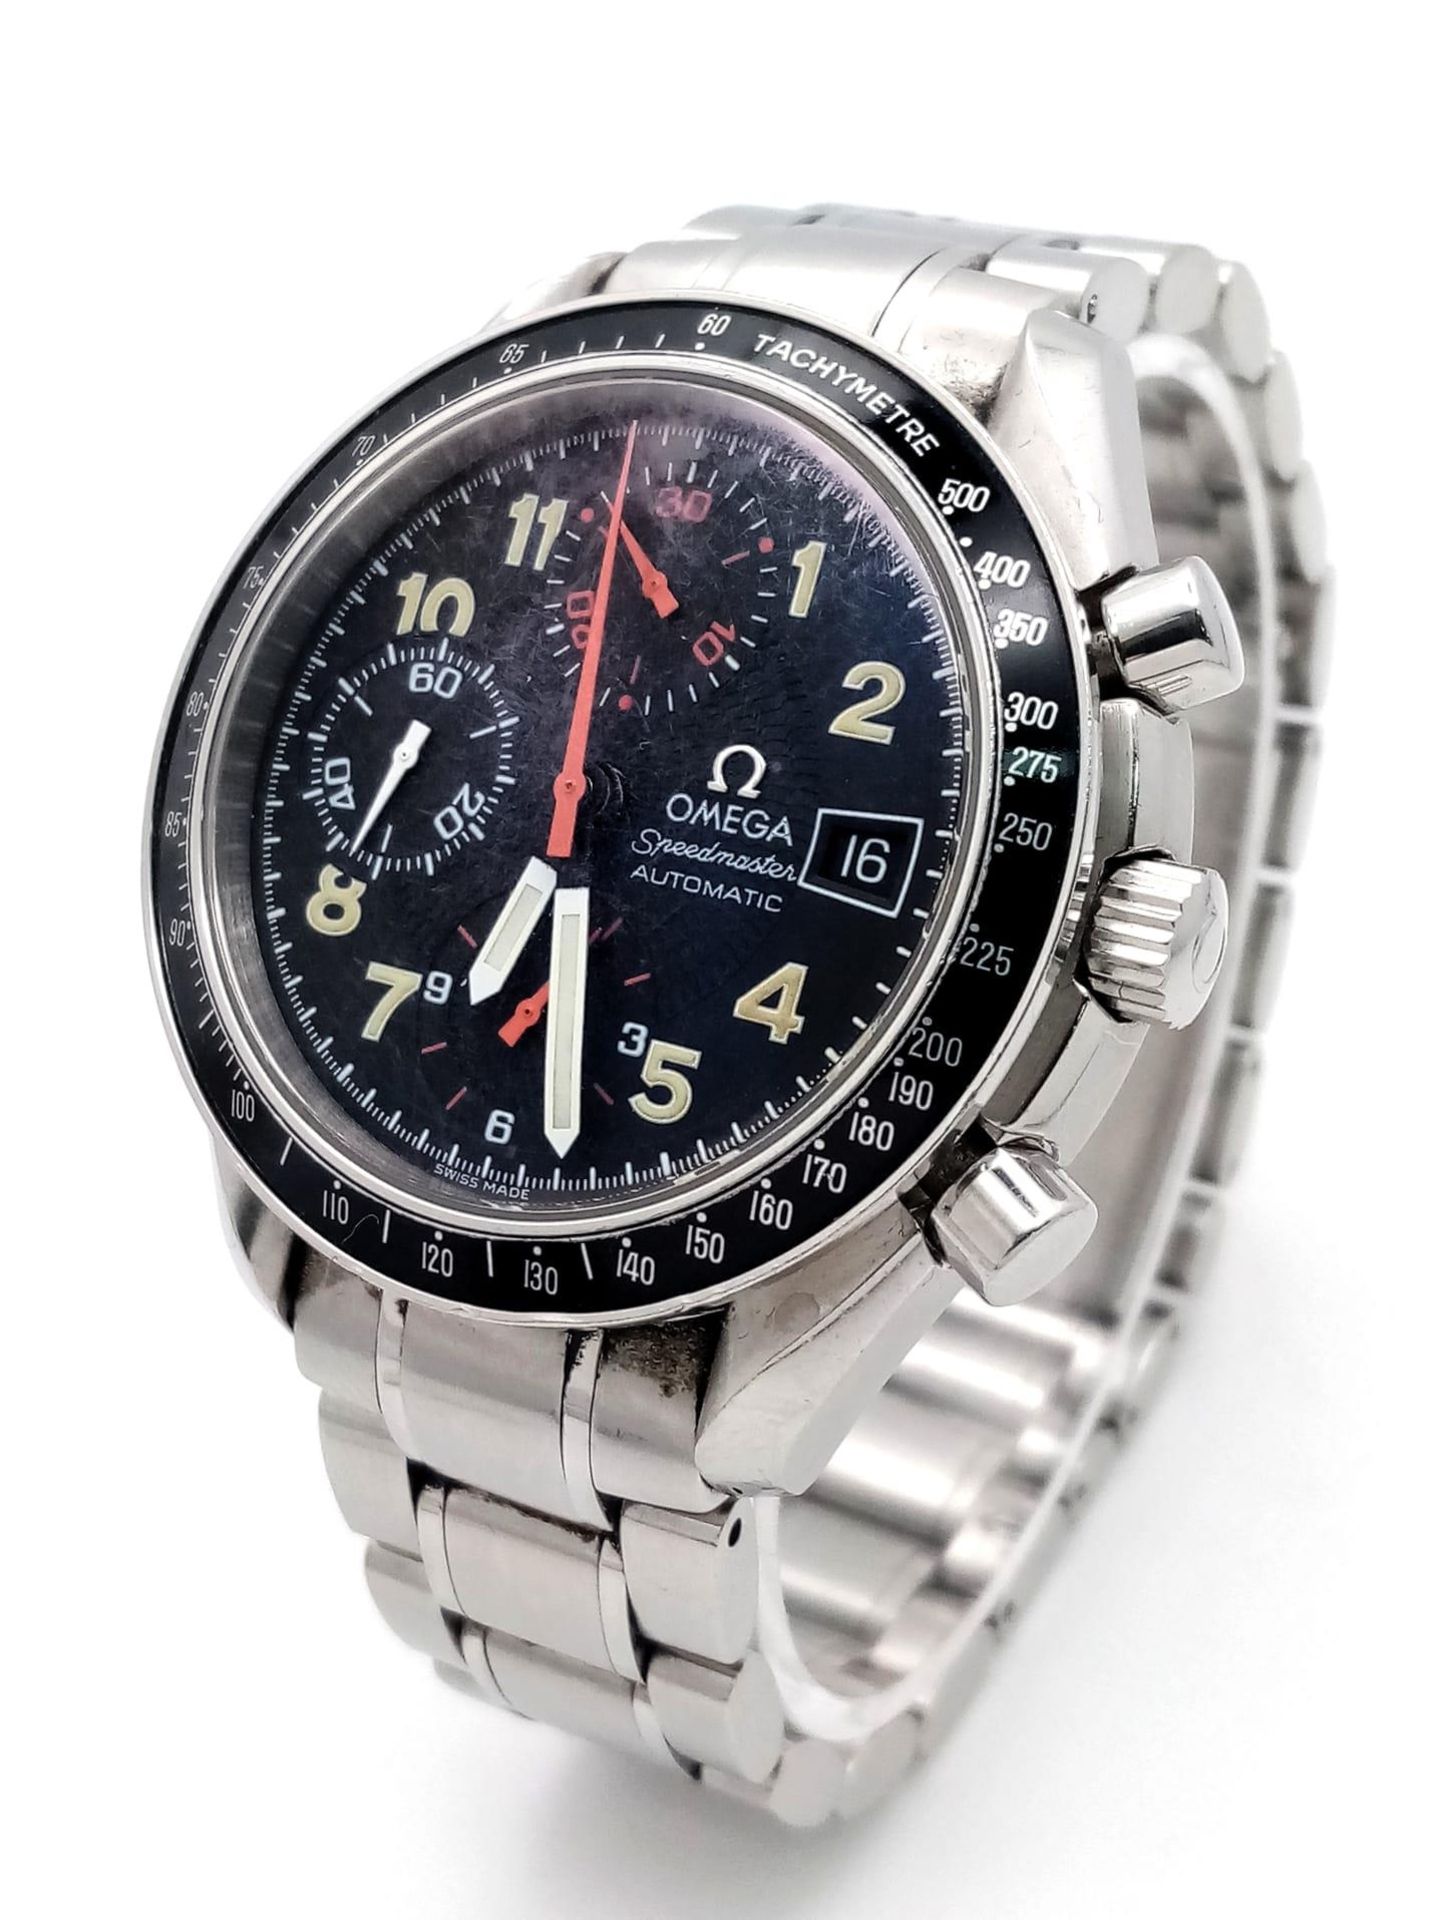 AN OMEGA "SEAMASTER"AUTOMATIC TACHYMETRE WITH 3 SUBDIALS , DATE BOX AND ON A STAINLESS STEEL STRAP .